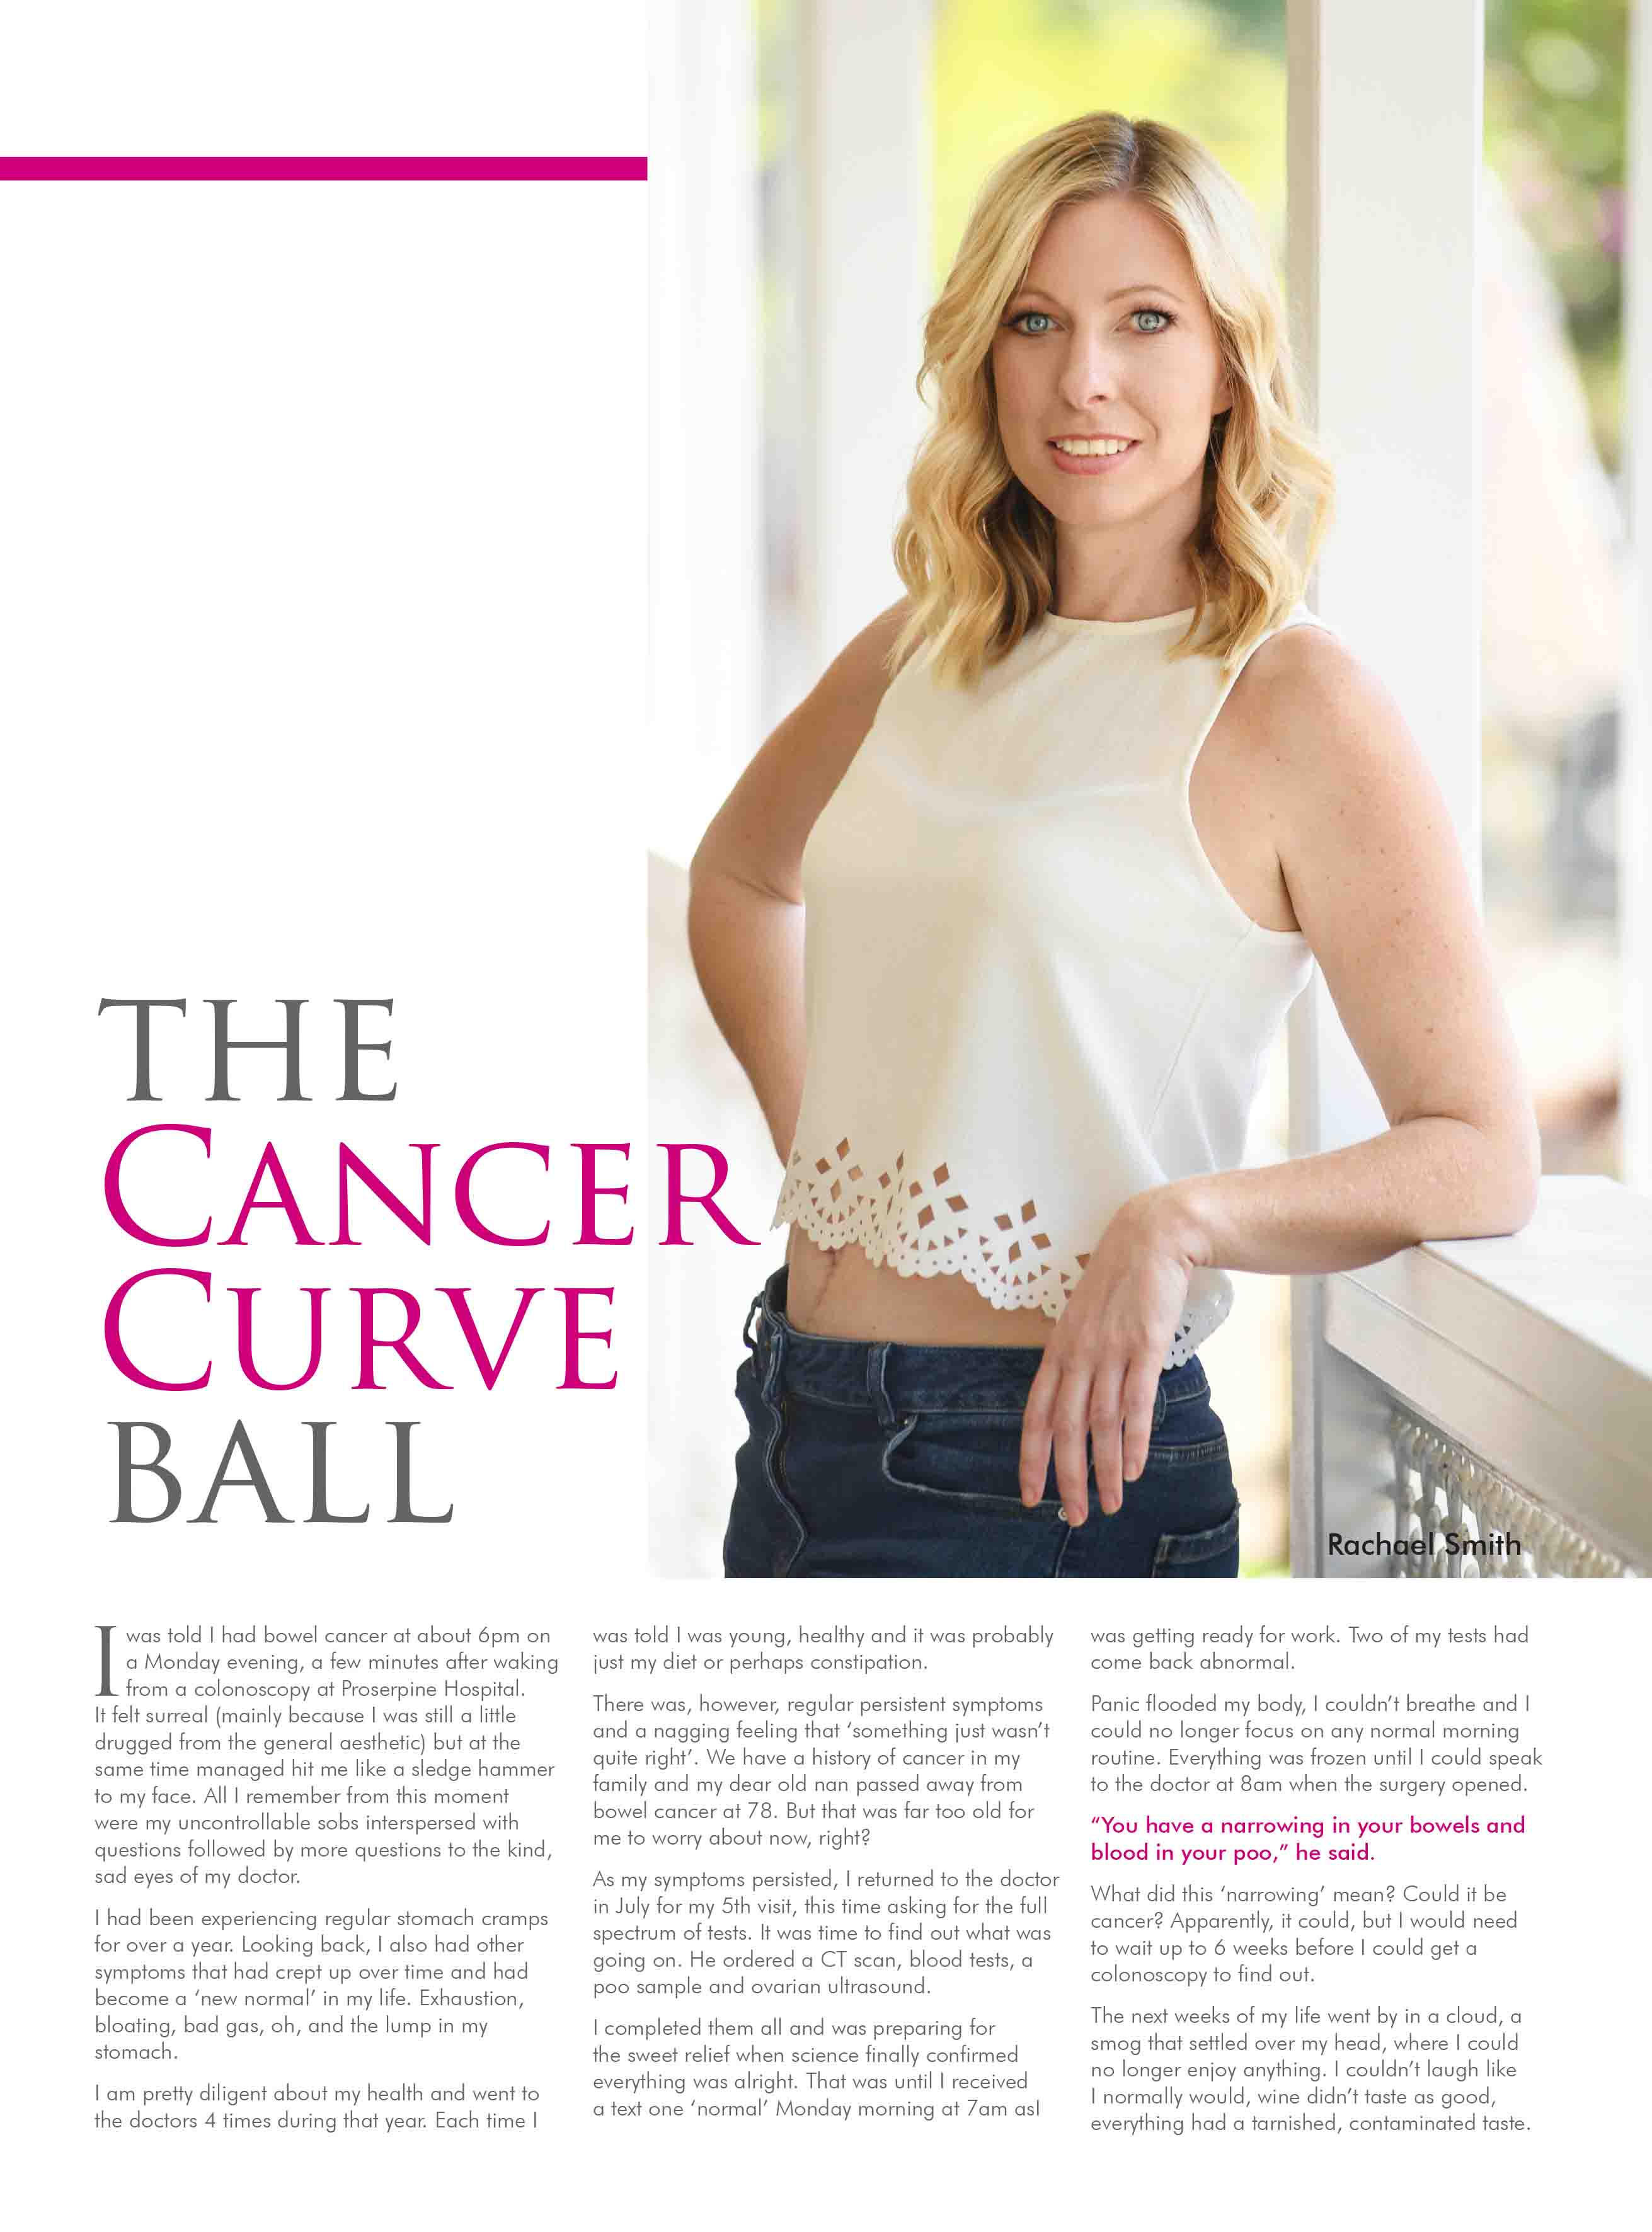 Core Magazine's Managing Editor, Rachael Smith, shares her cancer journey.